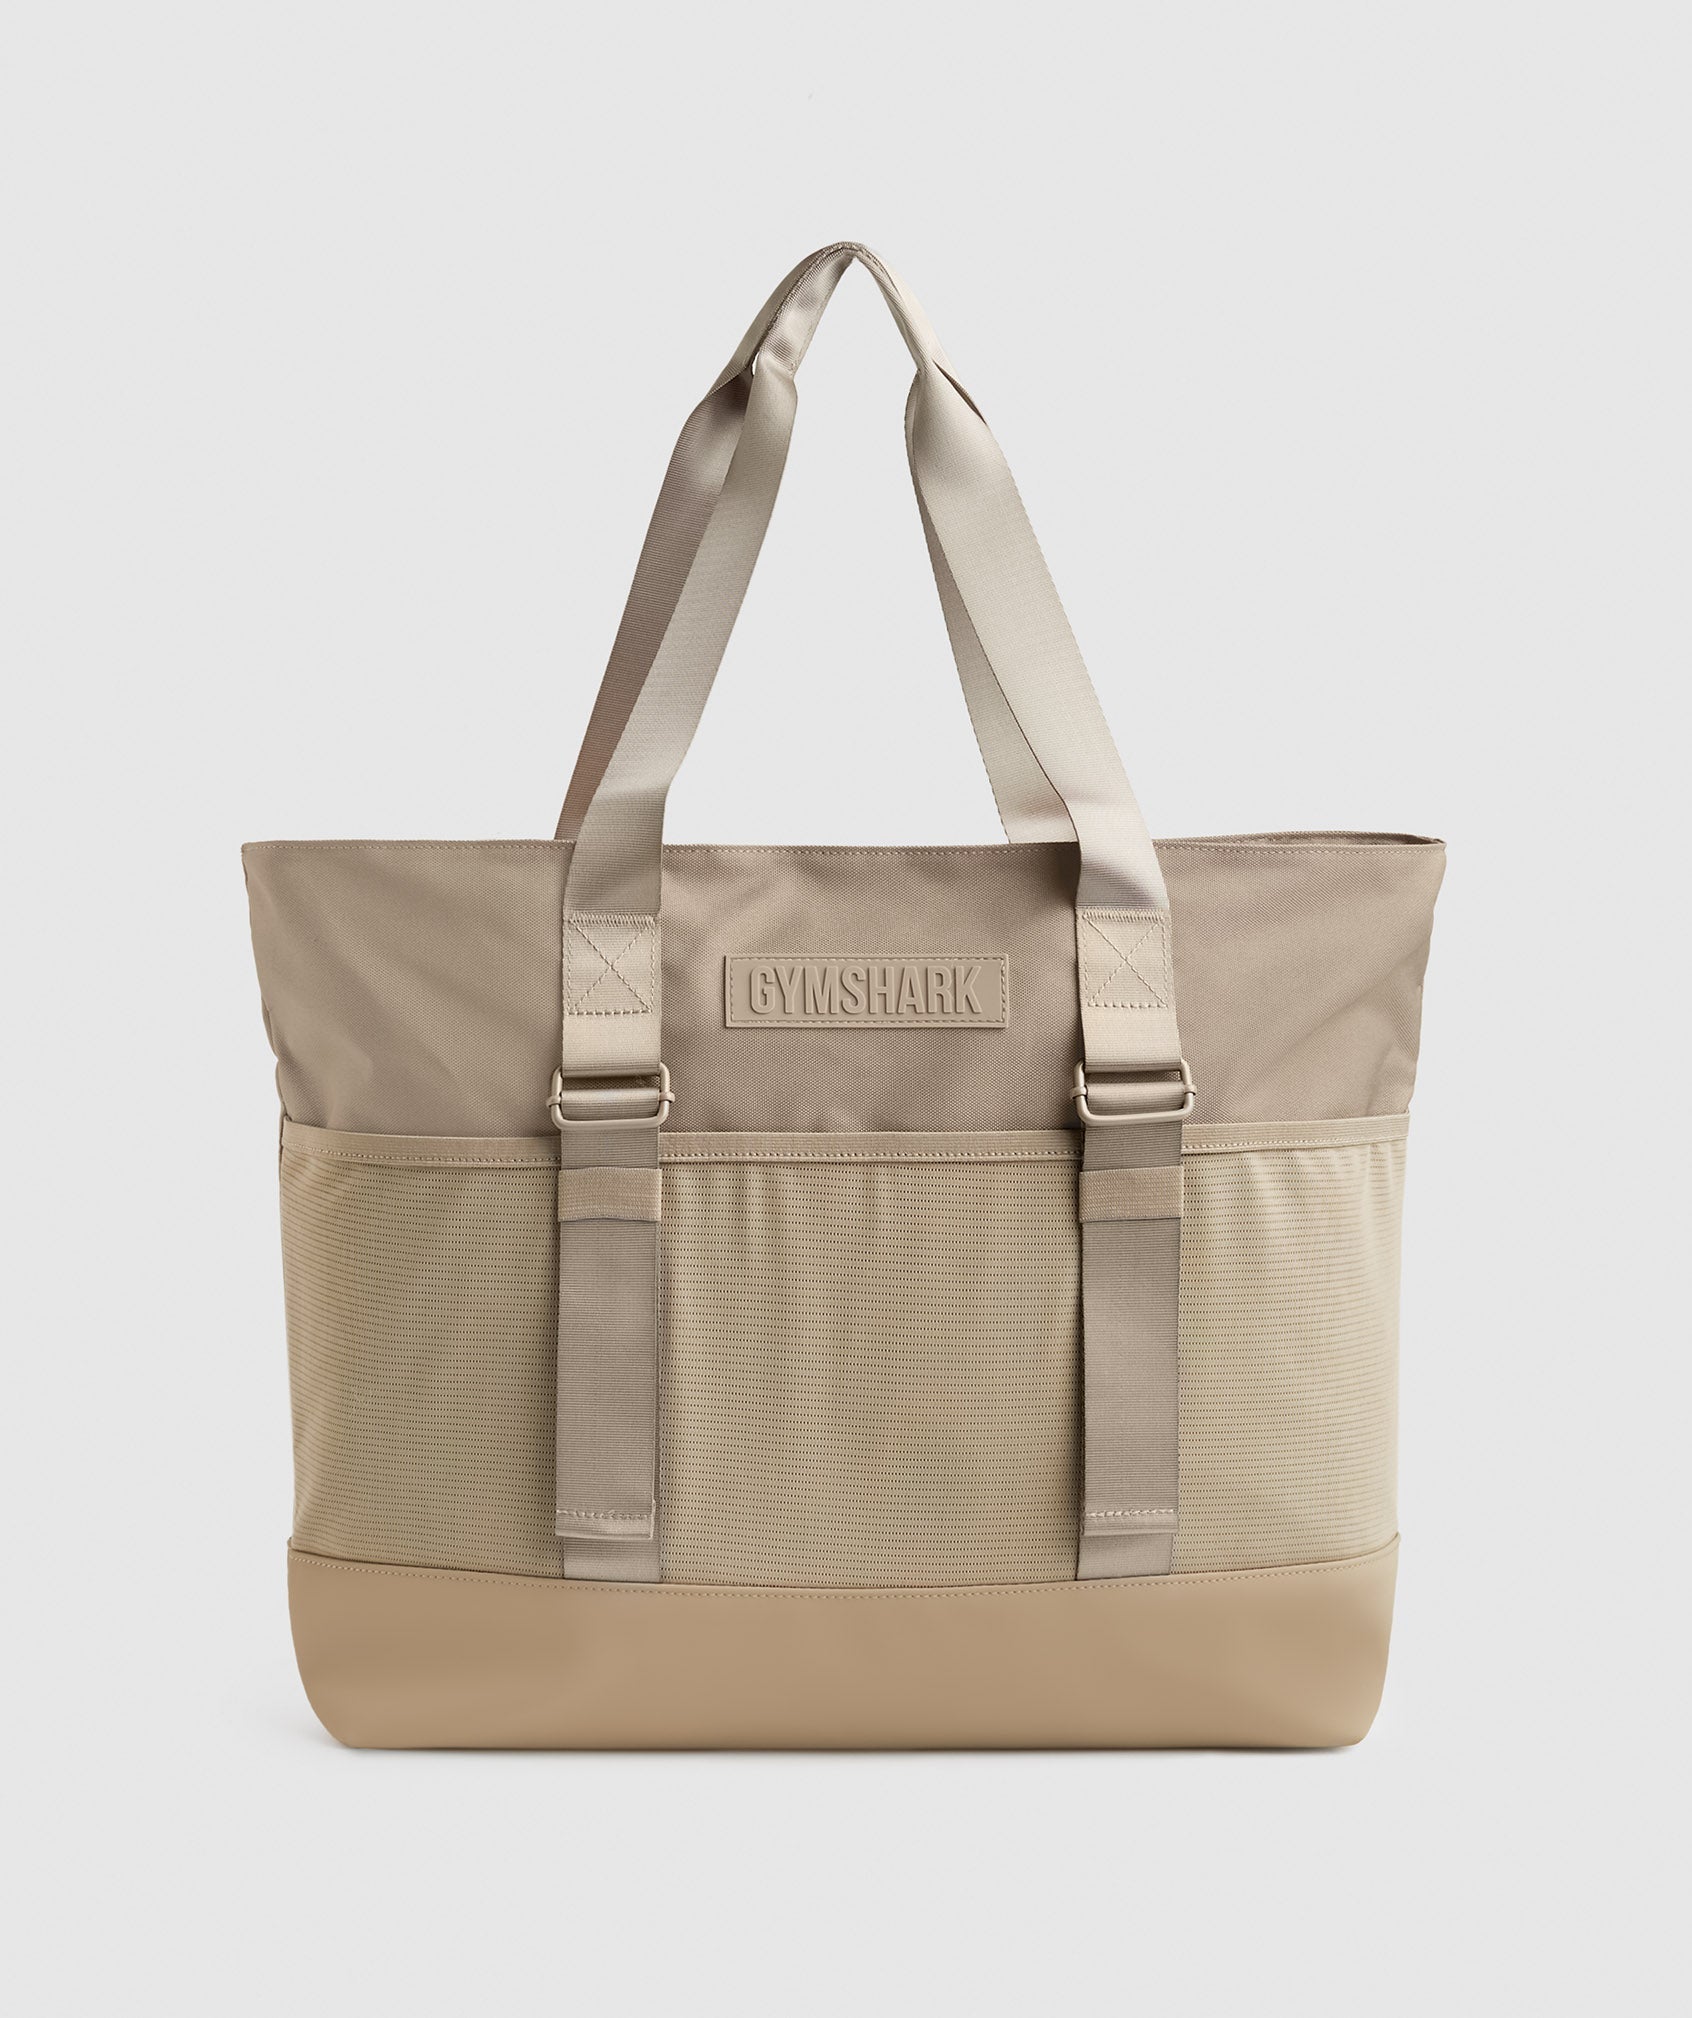 Everyday Tote in Cement Brown - view 1